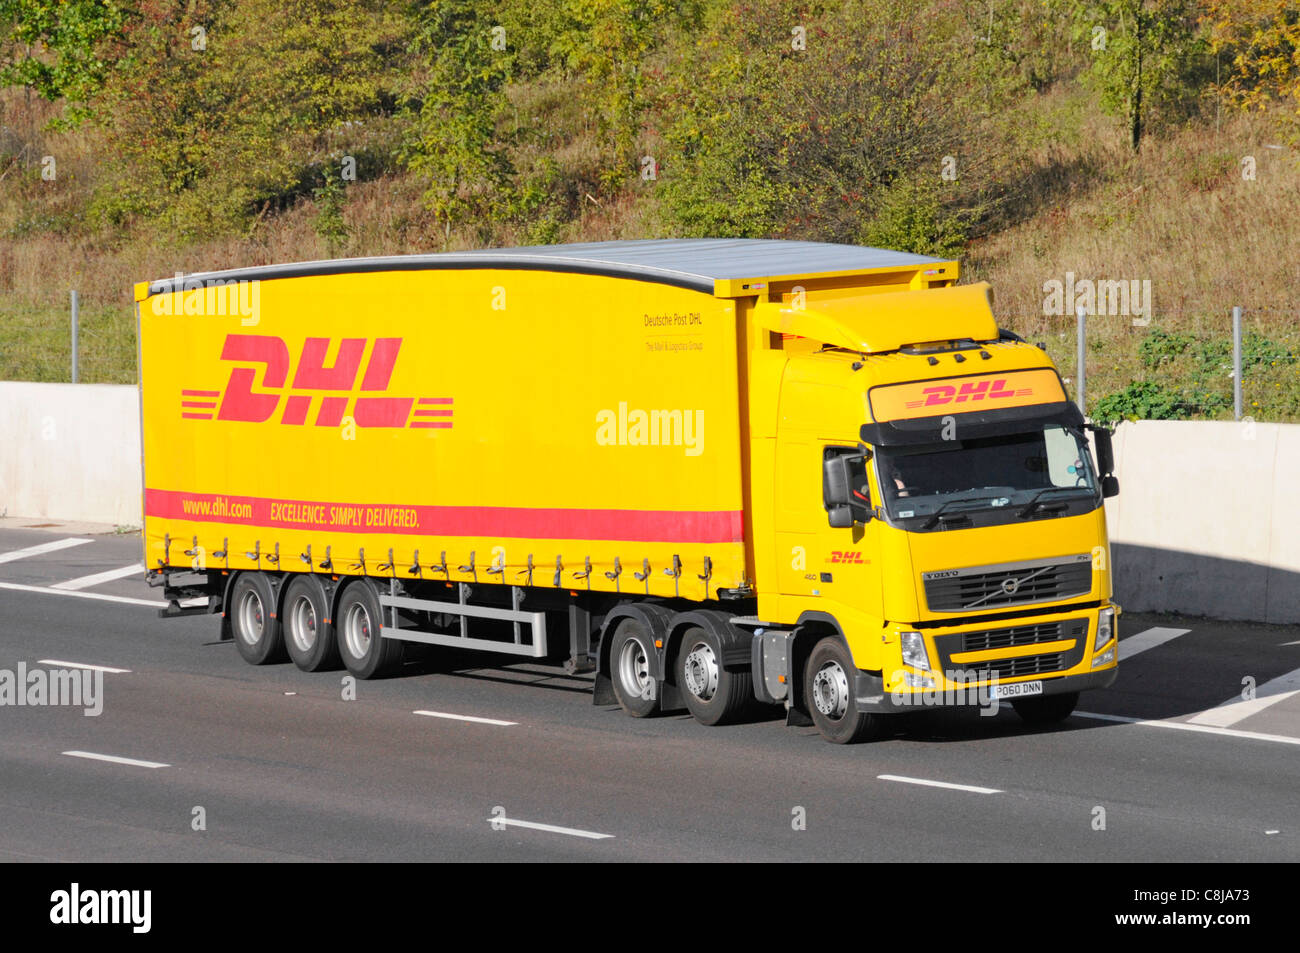 DHL Deutsche Post side & front view Volvo hgv lorry truck & soft sided sliding curtain articulated delivery trailer business brand & logo UK motorway Stock Photo